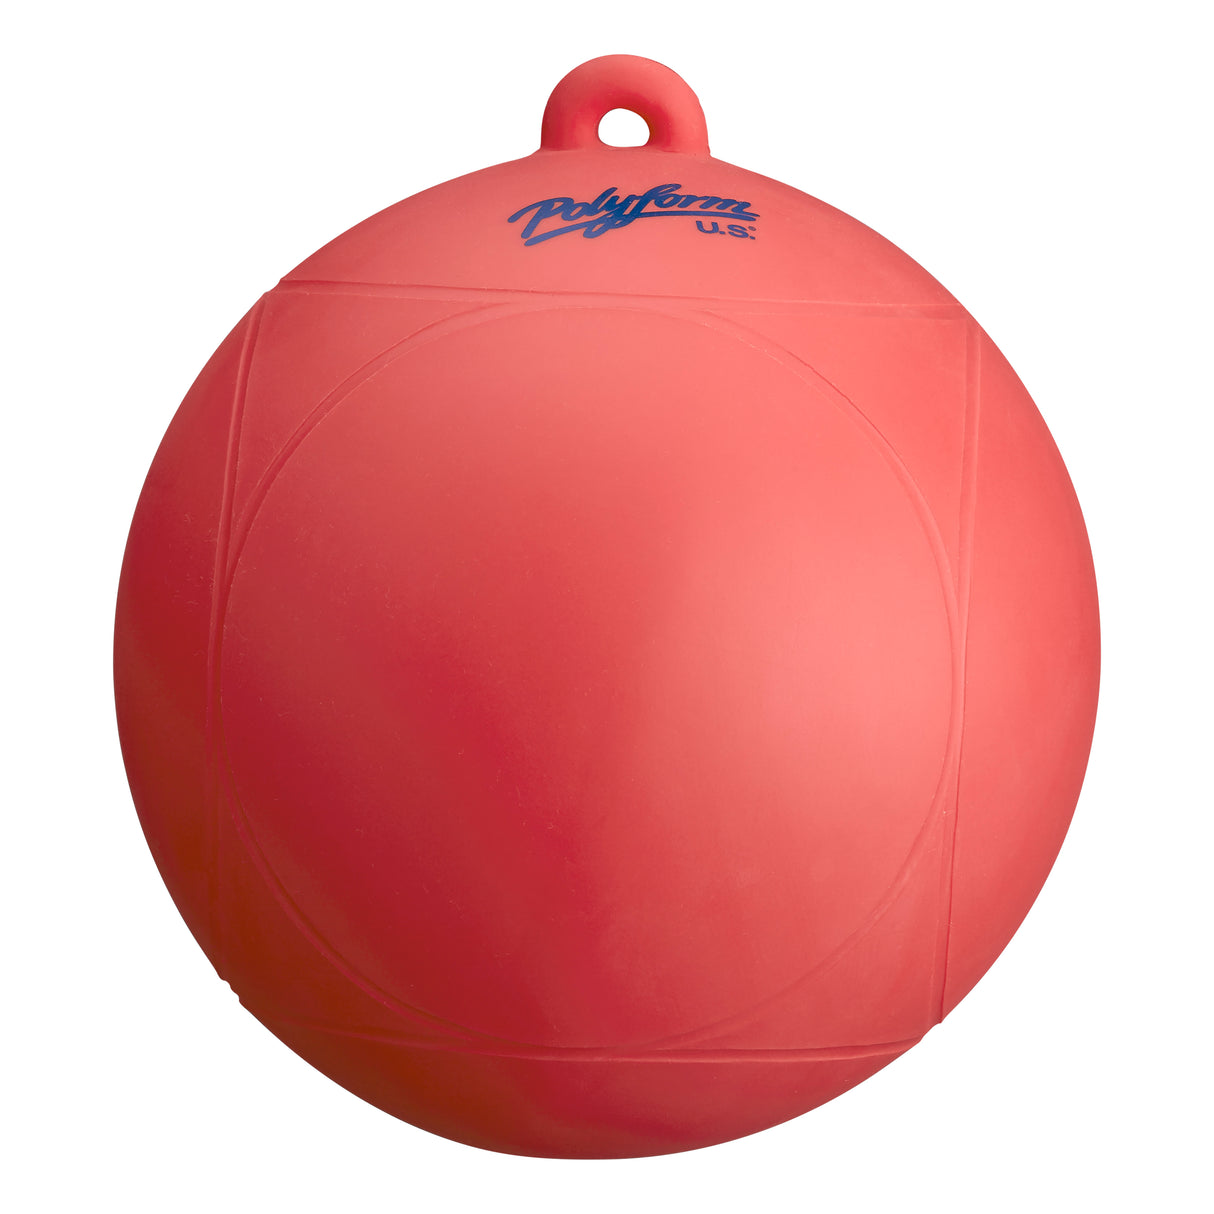 Water ski marker buoy, red with Polyform US logo